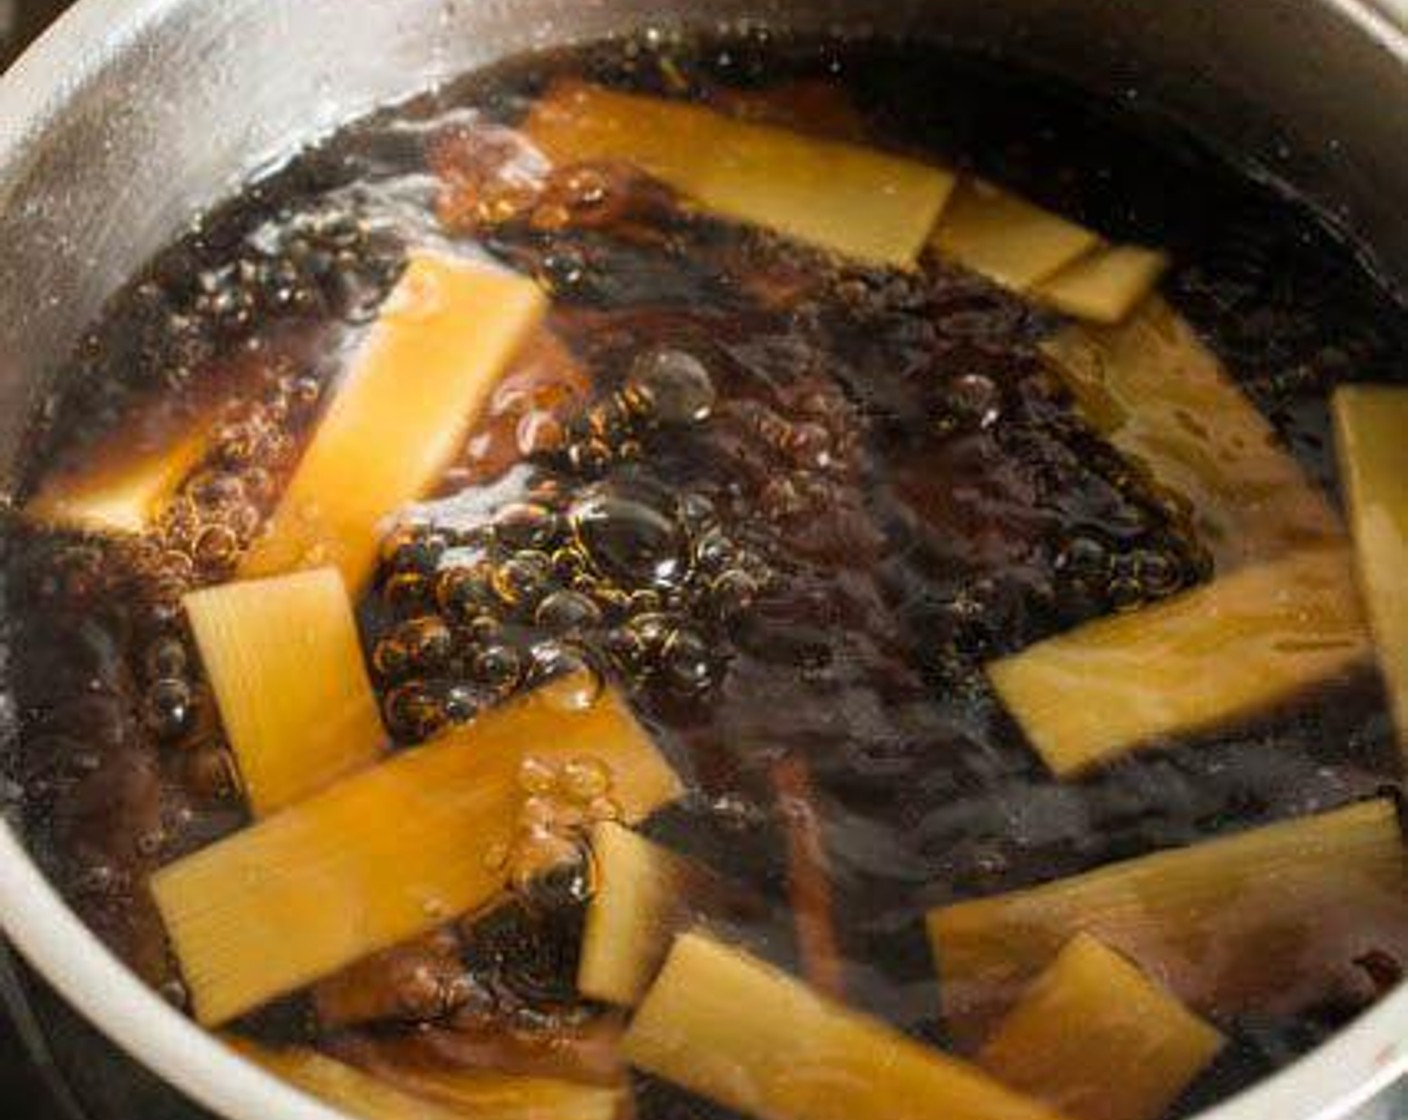 step 1 Combine the Bamboo Shoots (1/2 cup), Water (2 cups), Teriyaki Sauce (1/2 cup) and Mirin (1/4 cup) in a medium saucepan.